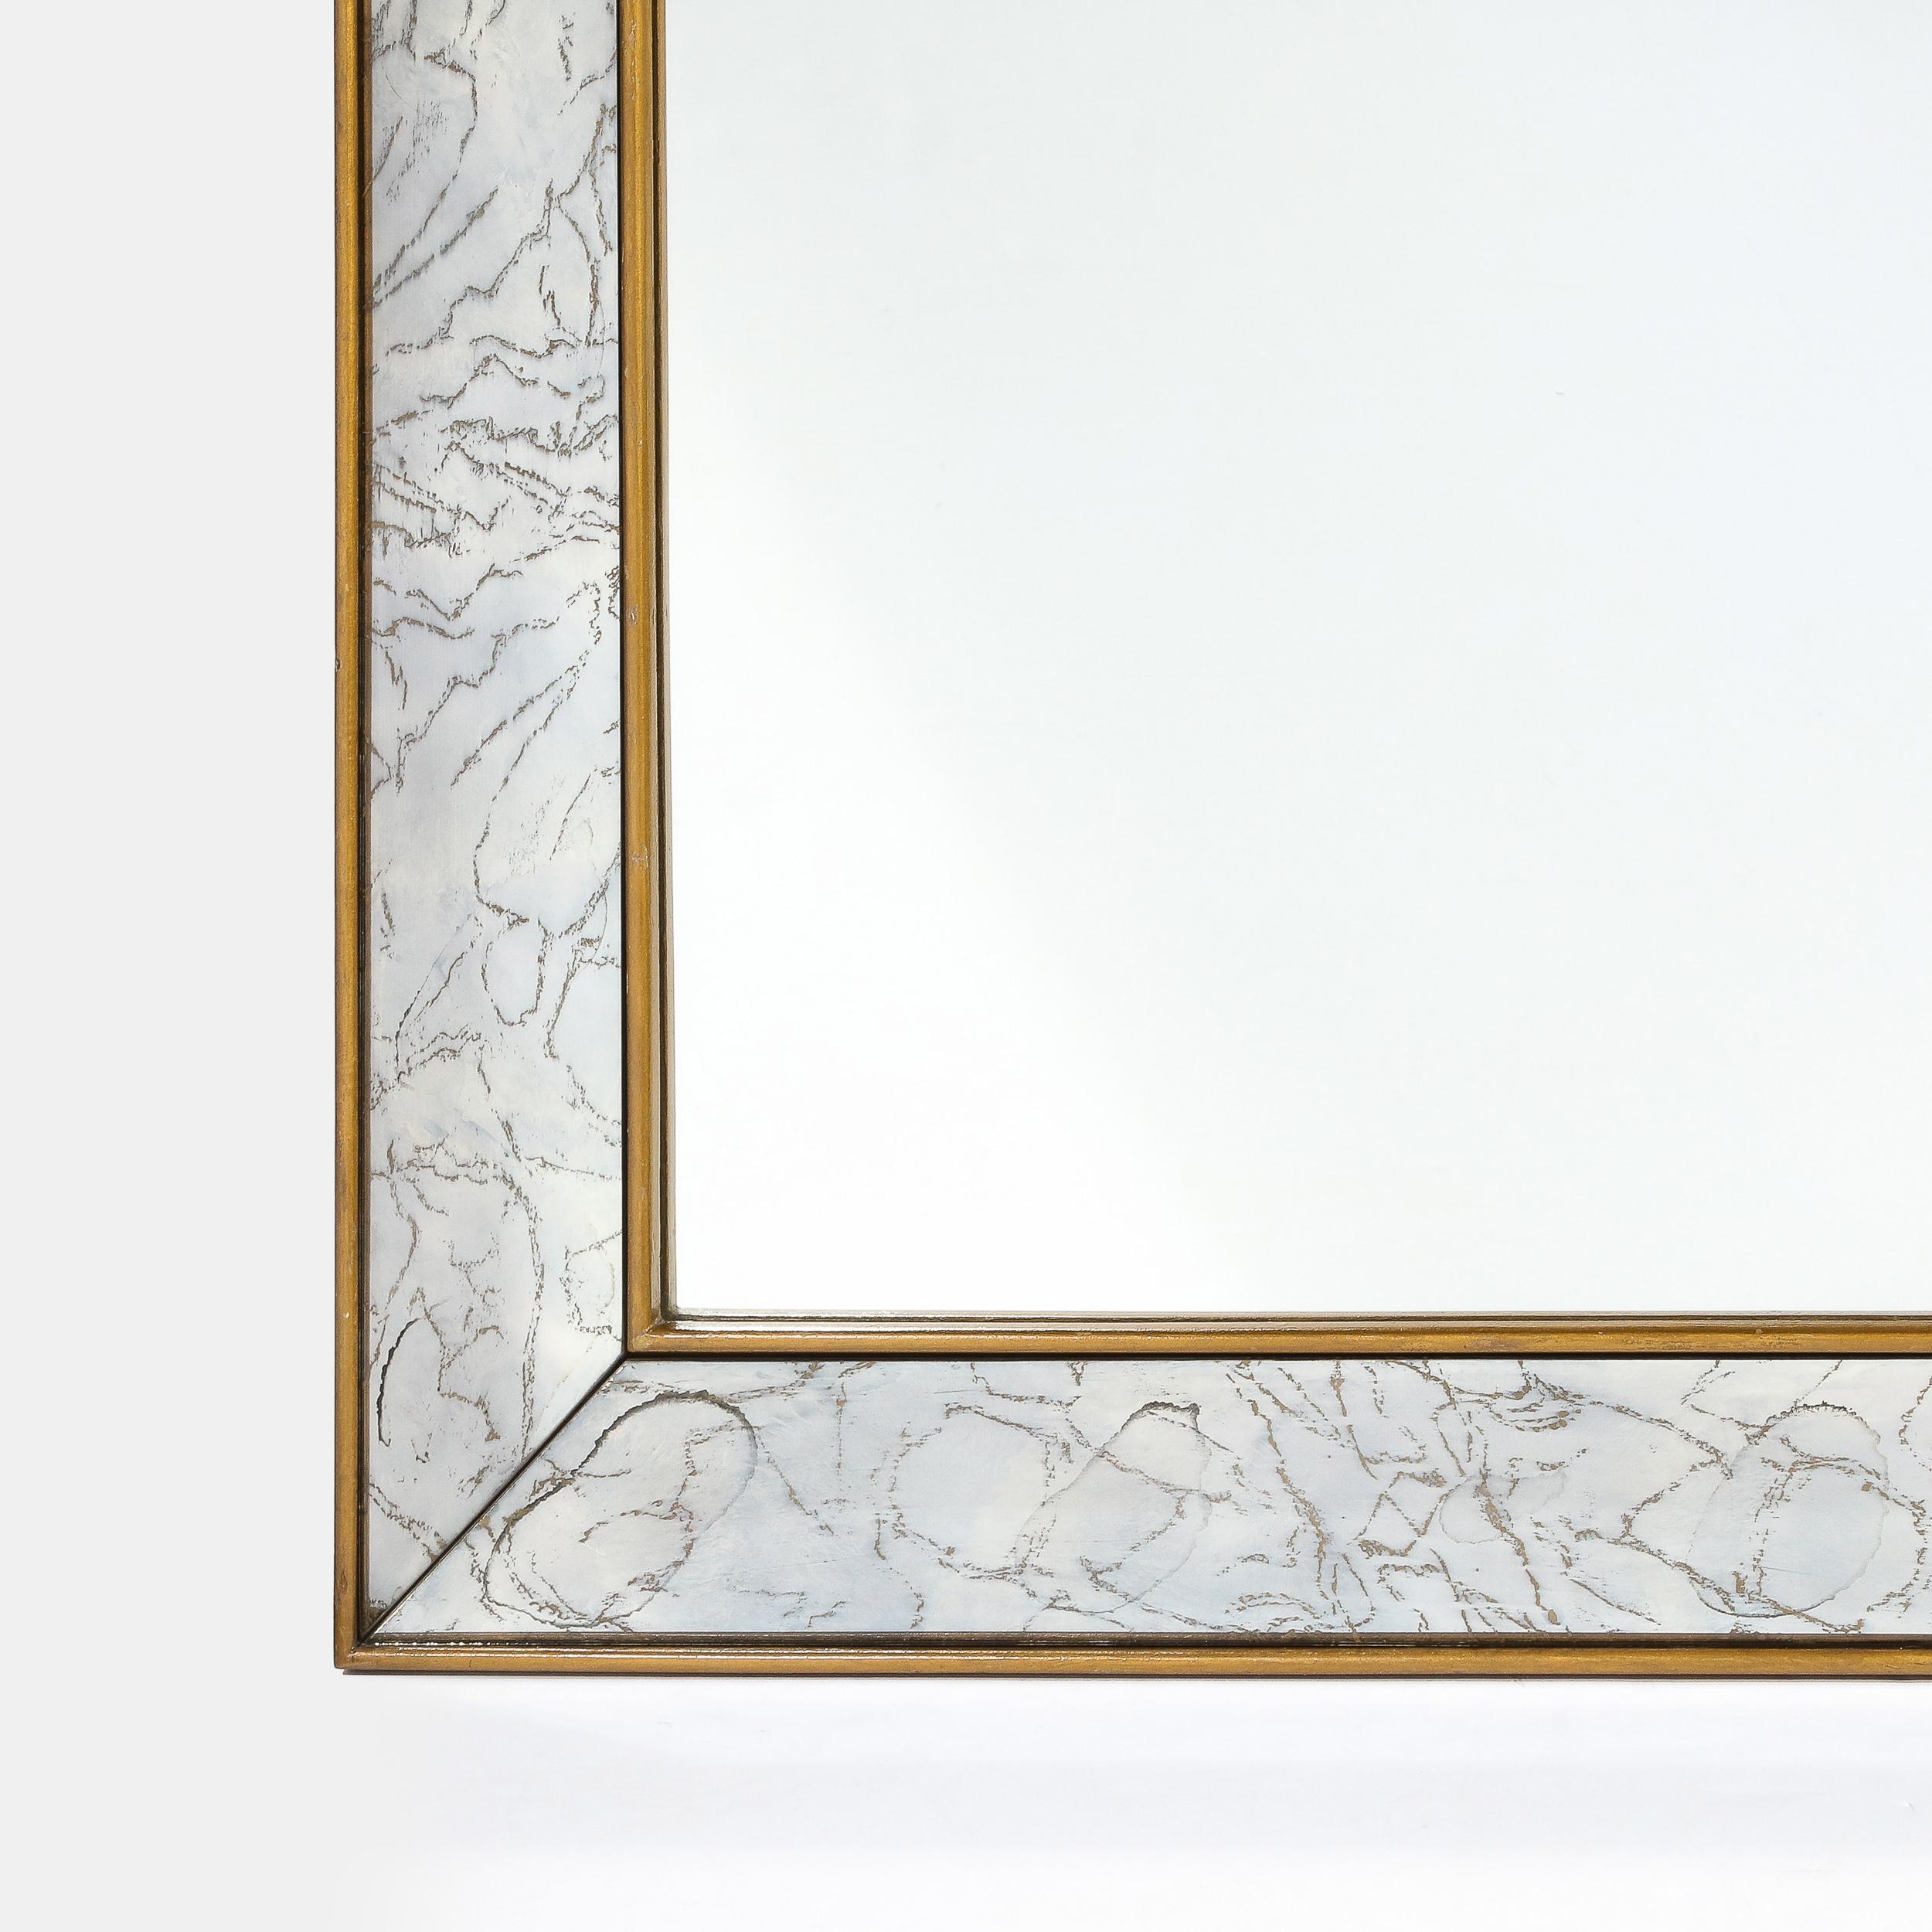 This stunning Mid Century Modern shadowbox mirror was realized in the United States circa 1950. It features a rectangular form with a gilded perimeter in 24kt yellow gold, as well as a gilded interior edge that bookend a beautifully marbled mirror